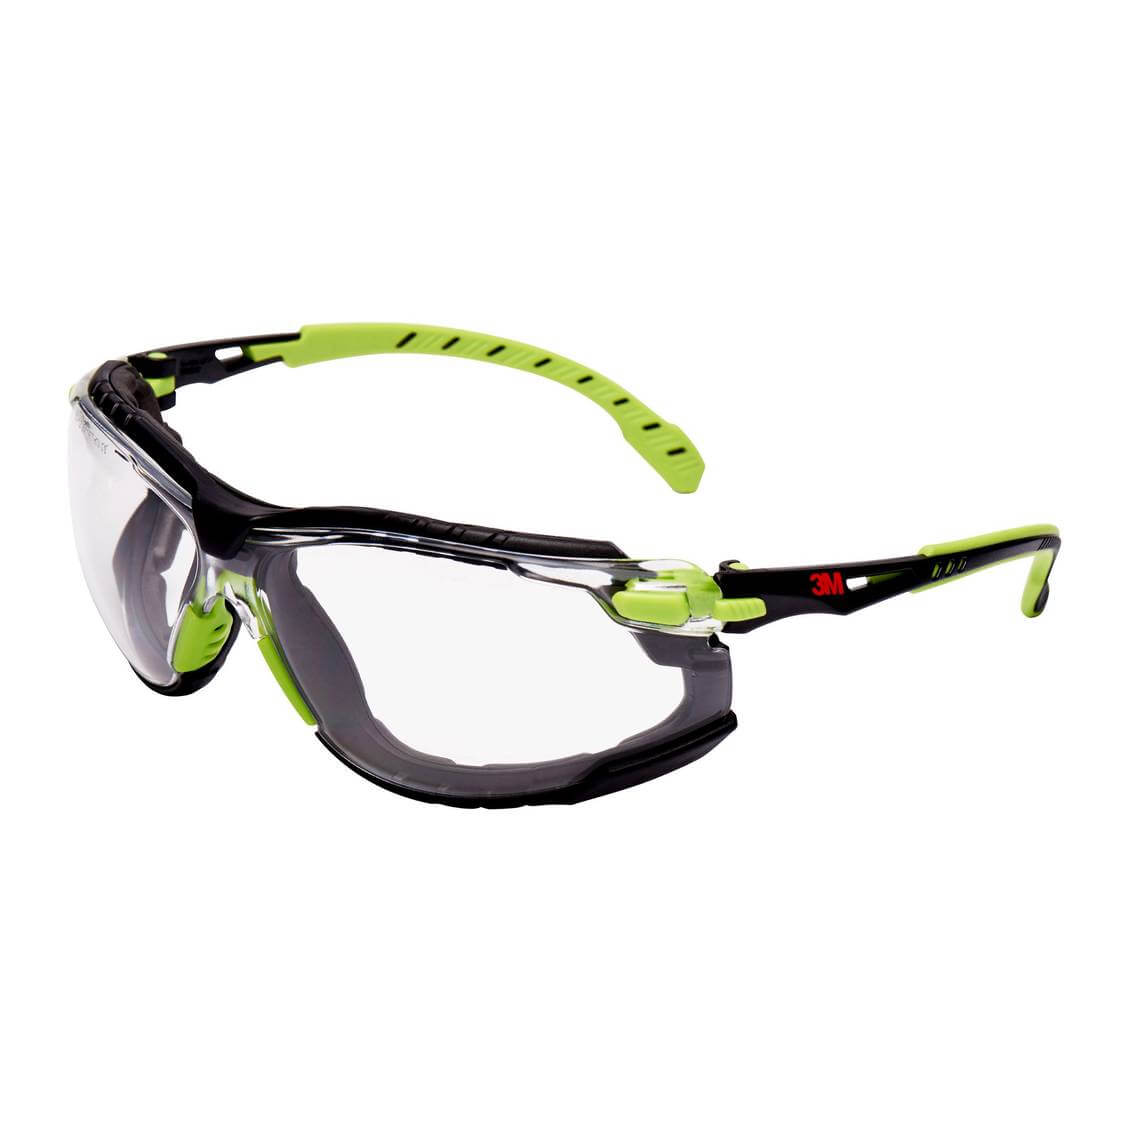 3M Solus 1000 Series Safety Spectacle